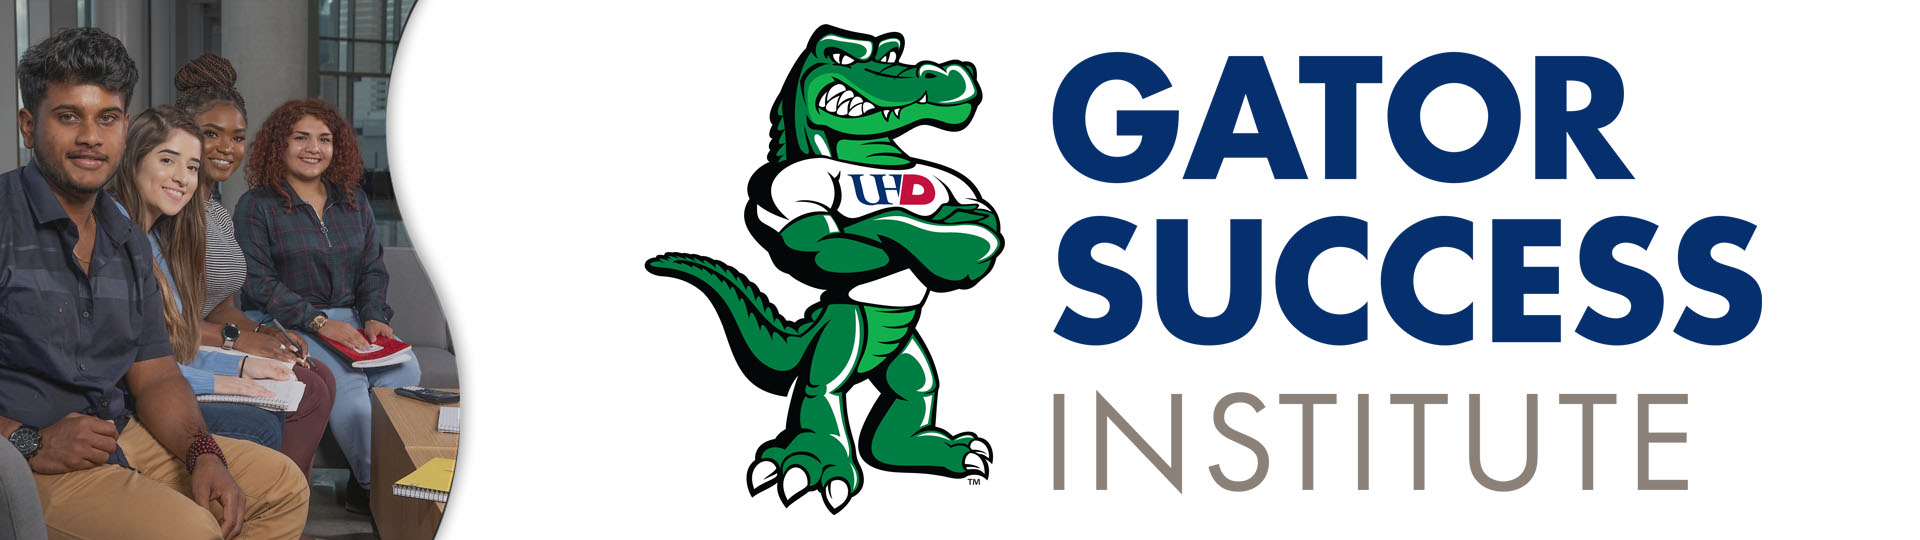 Gator Success Institute with image of UHD students